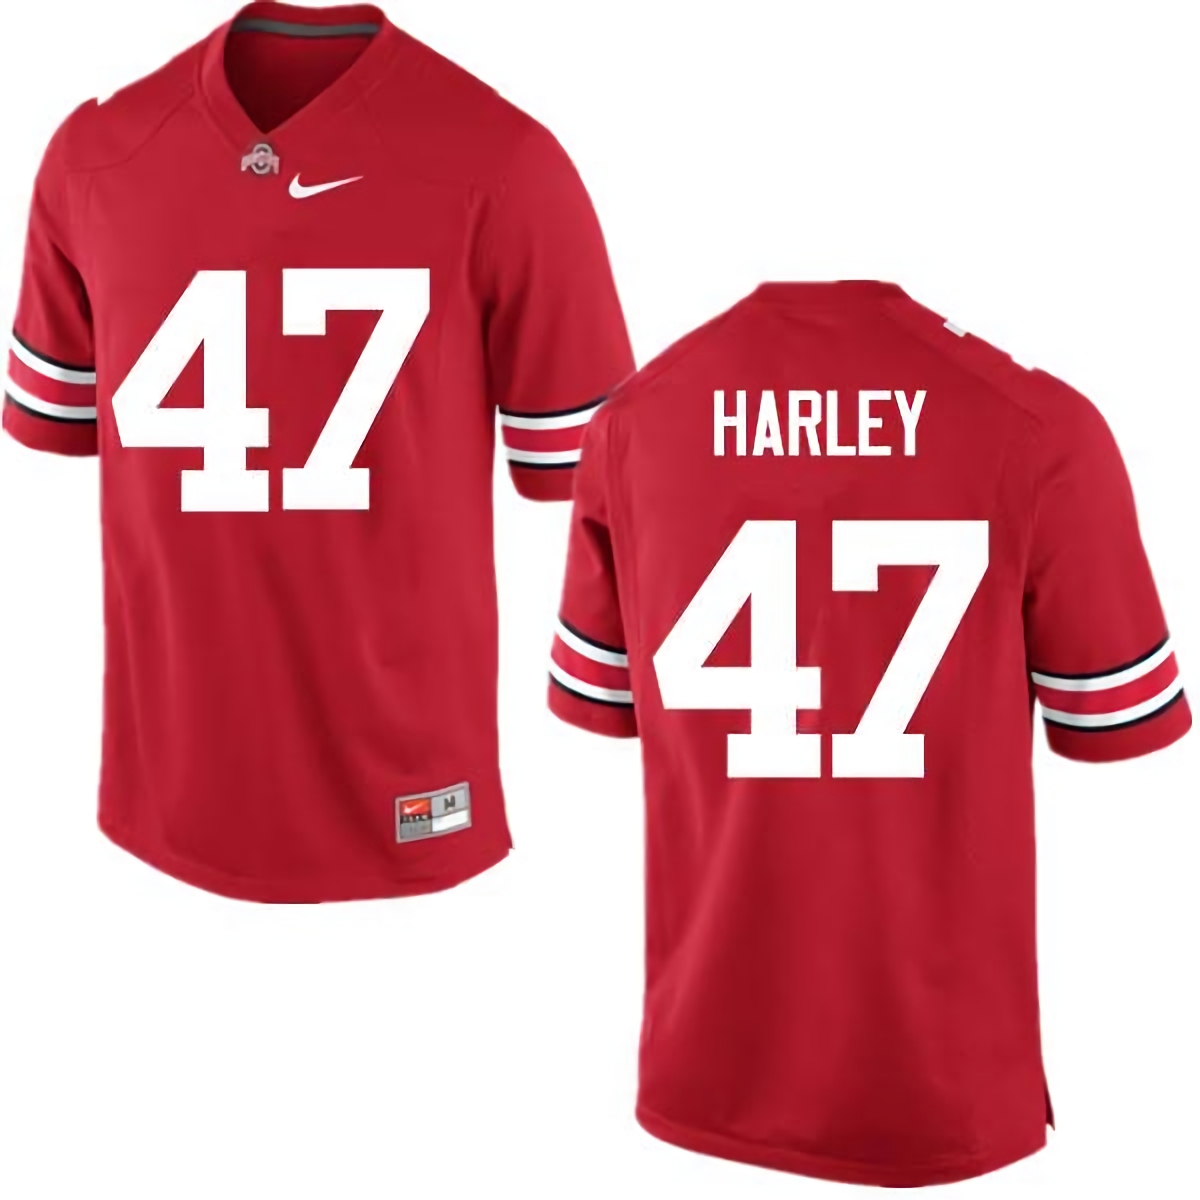 Chic Harley Ohio State Buckeyes Men's NCAA #47 Nike Red College Stitched Football Jersey NBO2756AQ